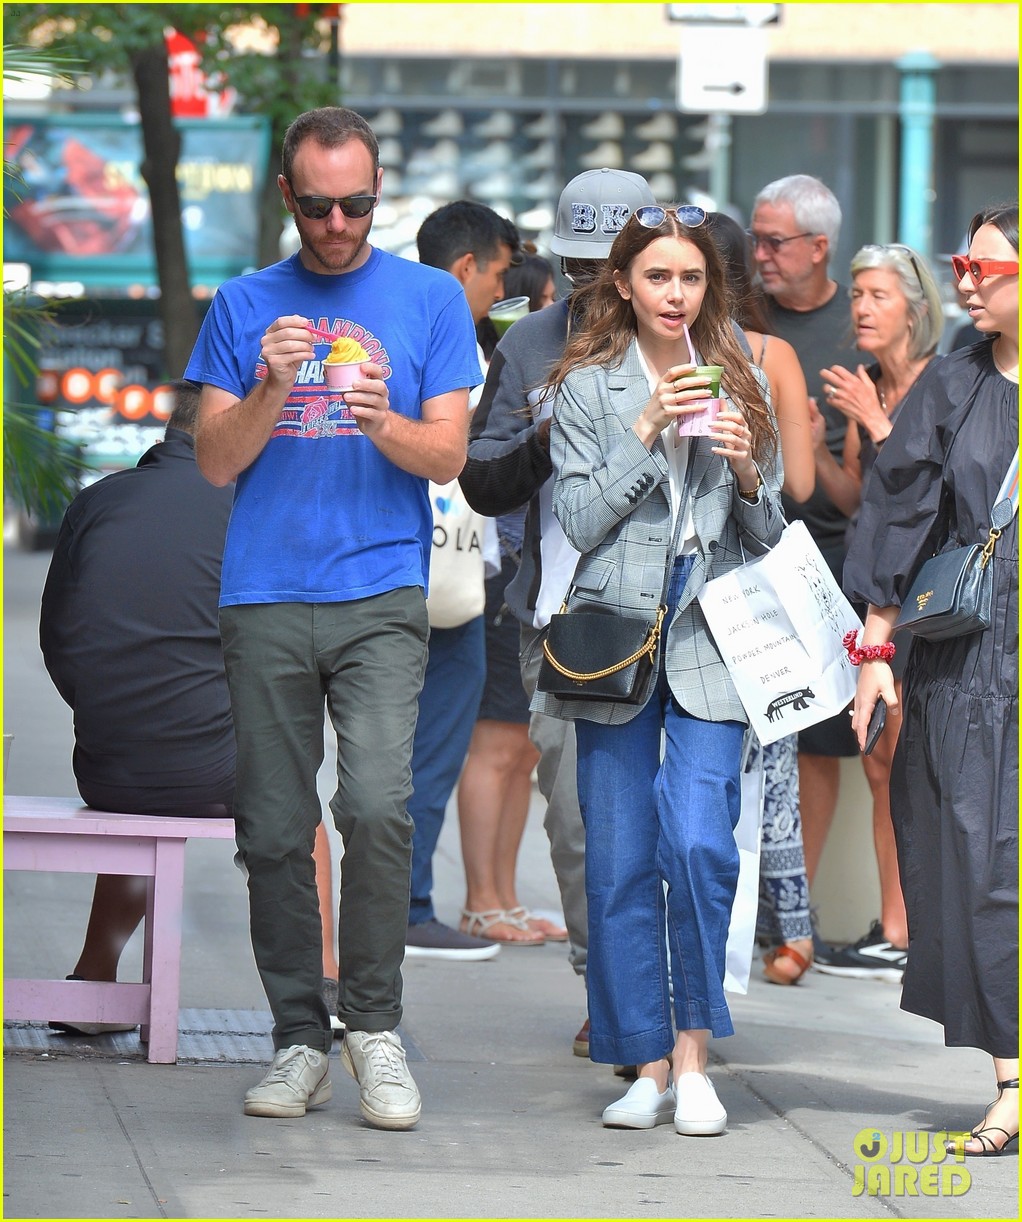 Lily Collins Looks So Happy With Charlie Mcdowell Photo Charlie Mcdowell Lily Collins Pictures Just Jared Jr